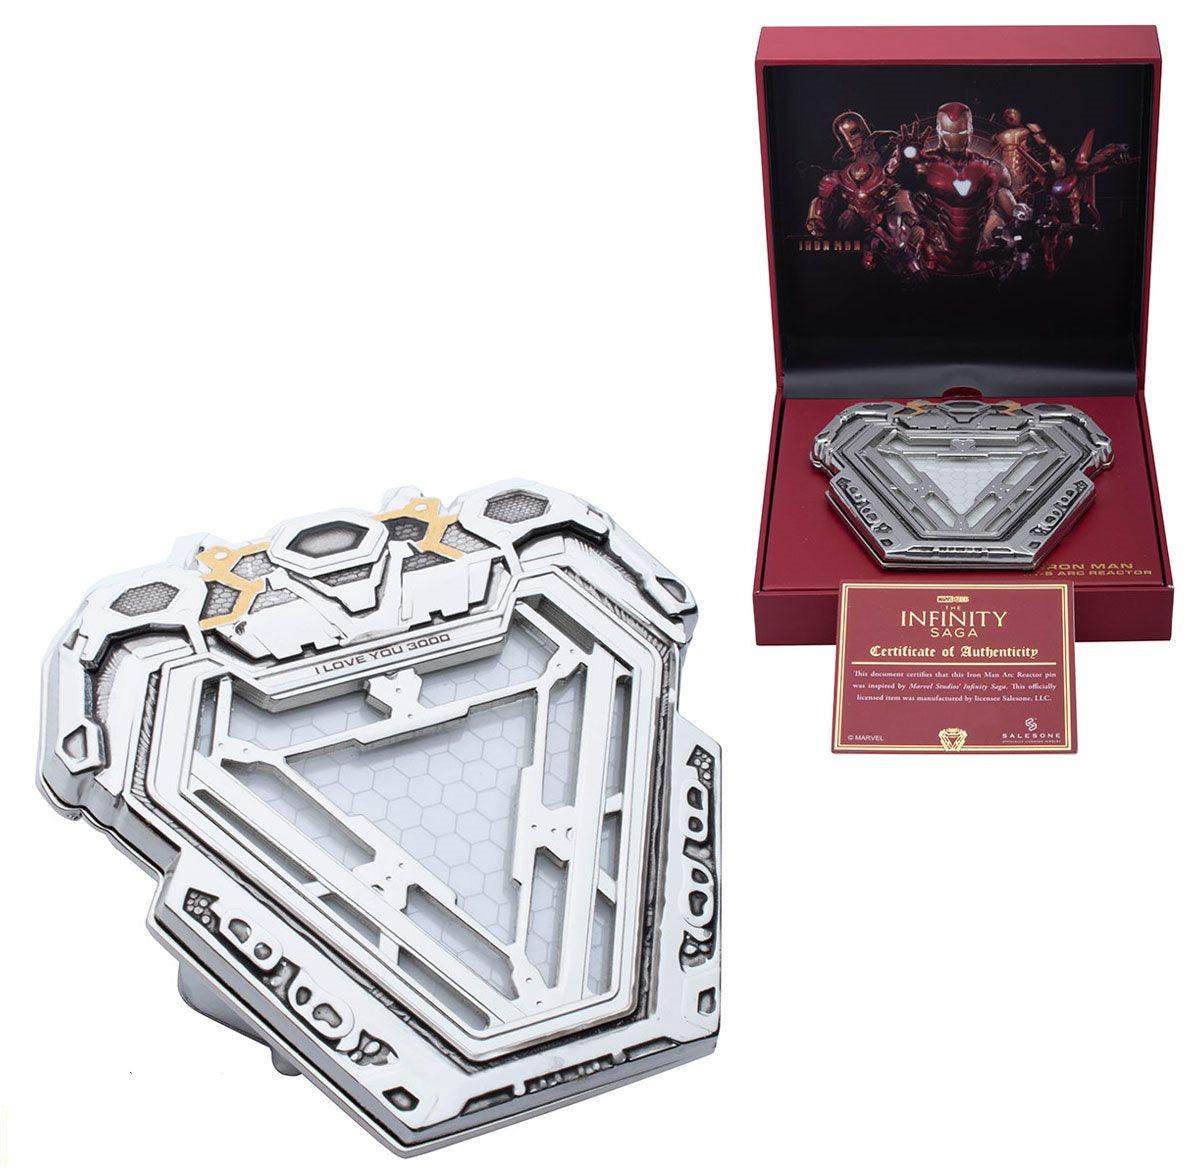 Replica 1/1 Reattore Arc RT-5 Led light-up Limited Edition - IRON MAN - Magic Dreams Store